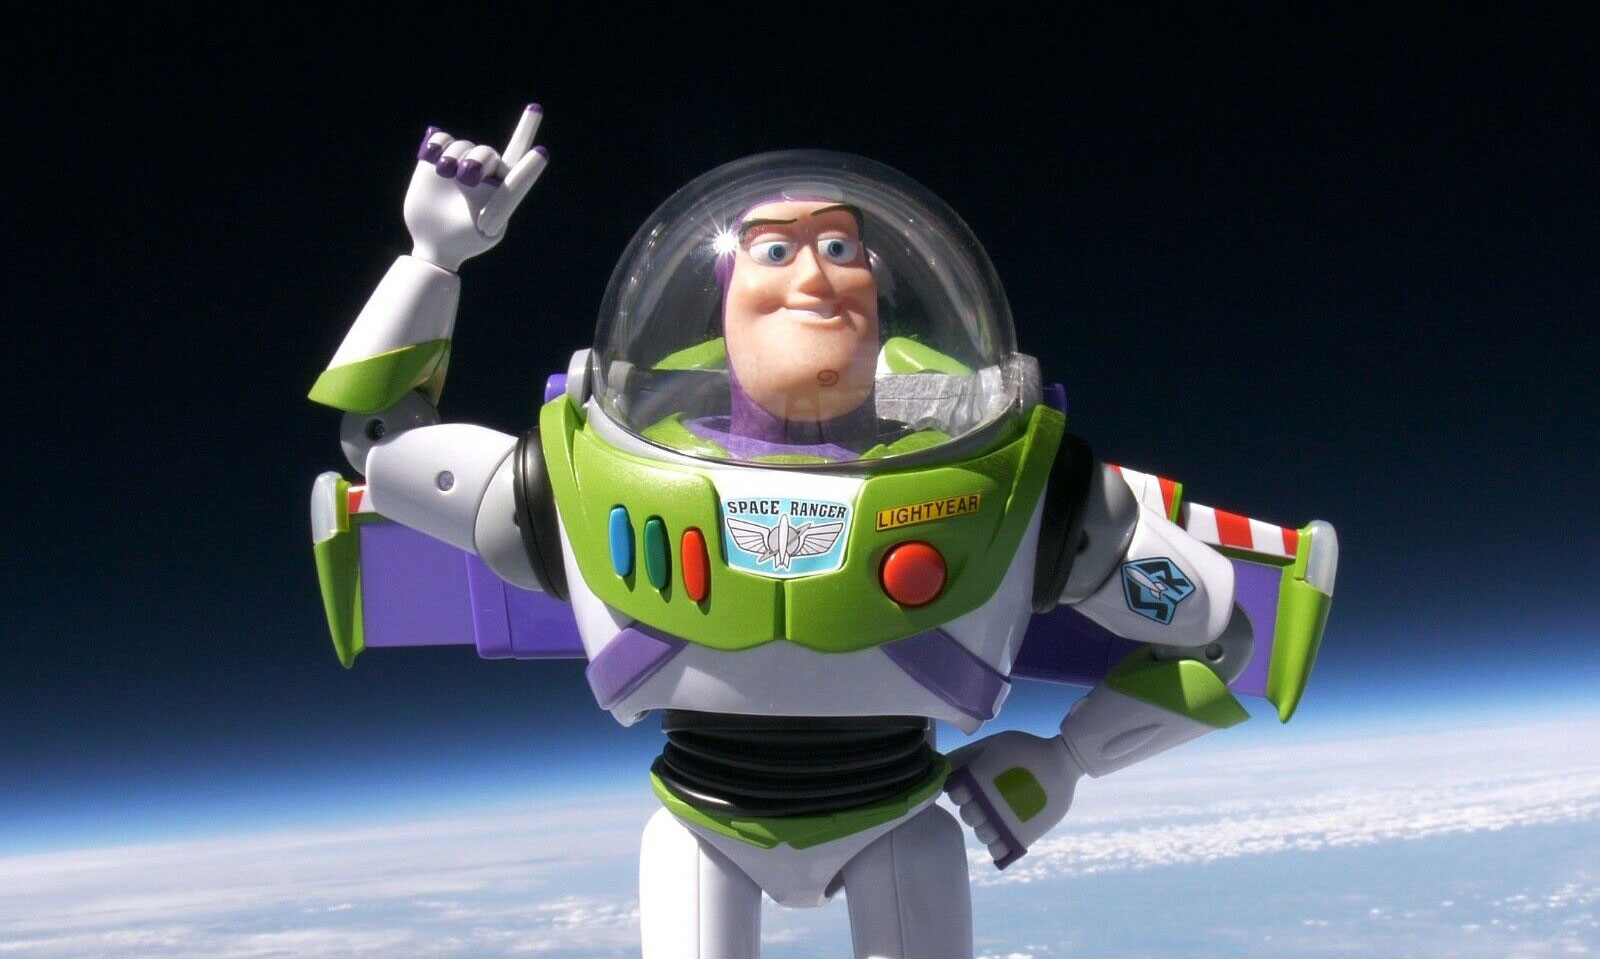 ebay buzz lightyear been to space